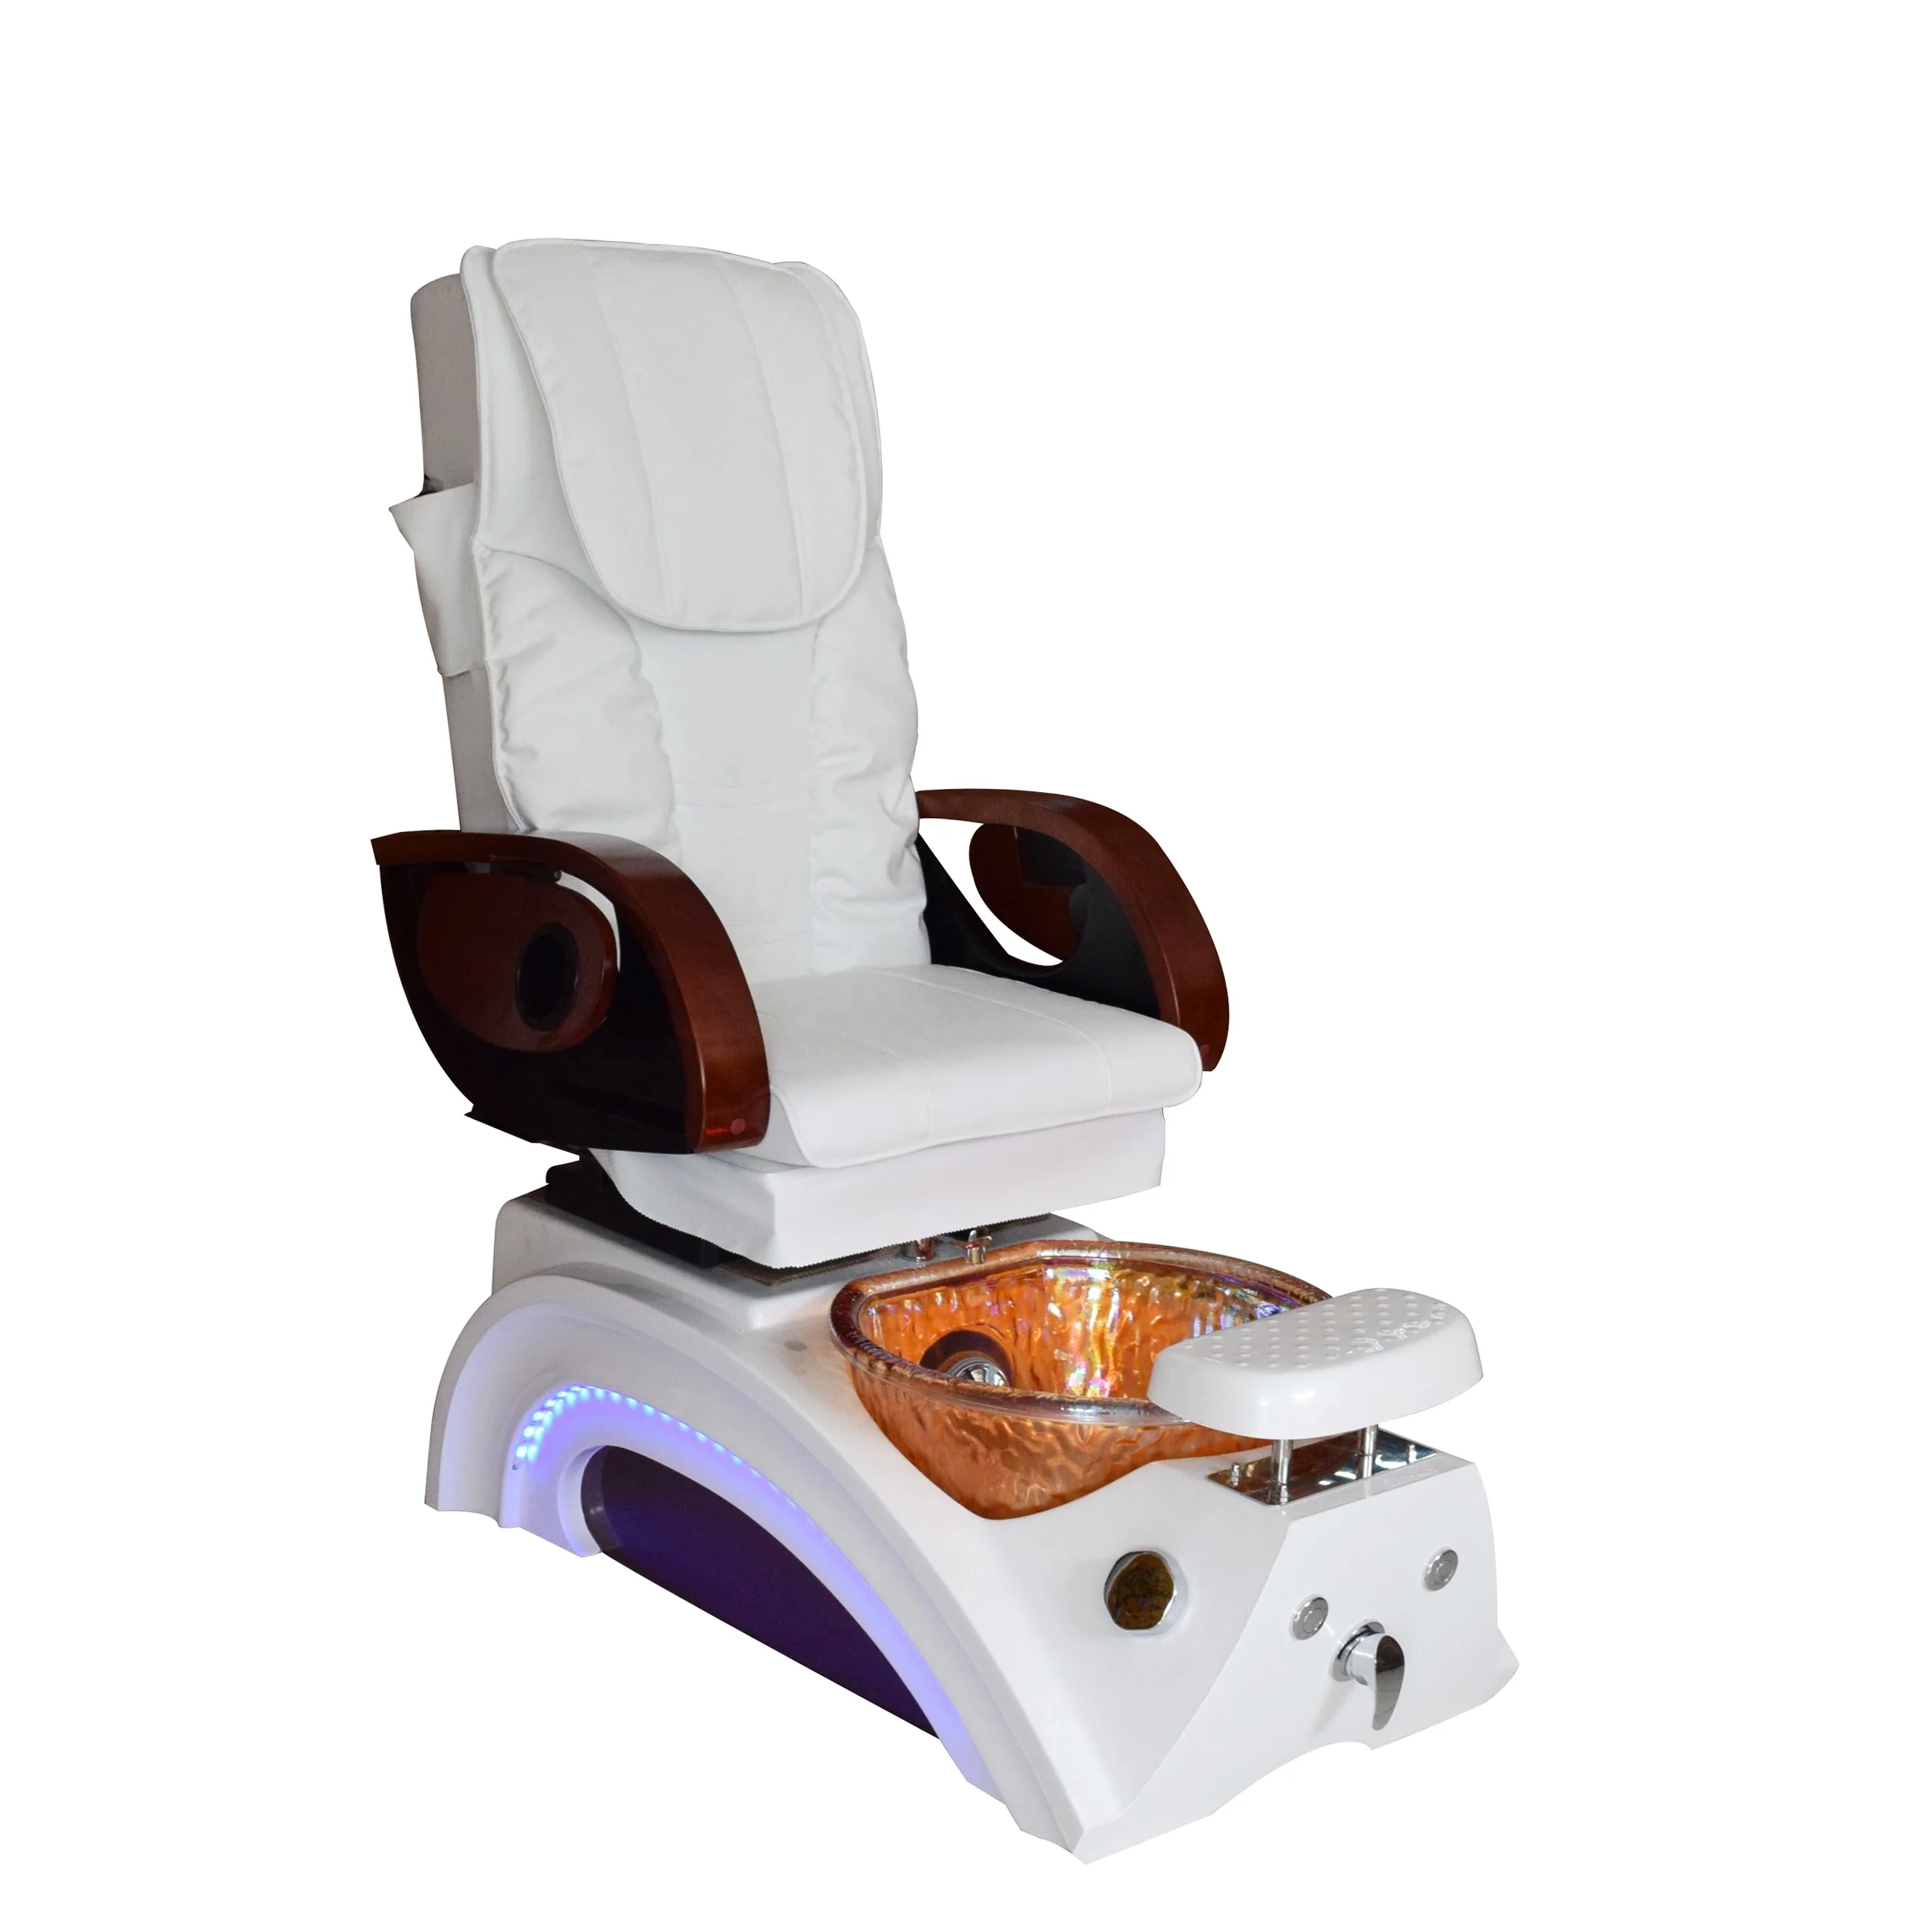 Luxury Manicure Pedicure Chair For Nail Salon Used Spa Barber Pedicure Chair With Massage